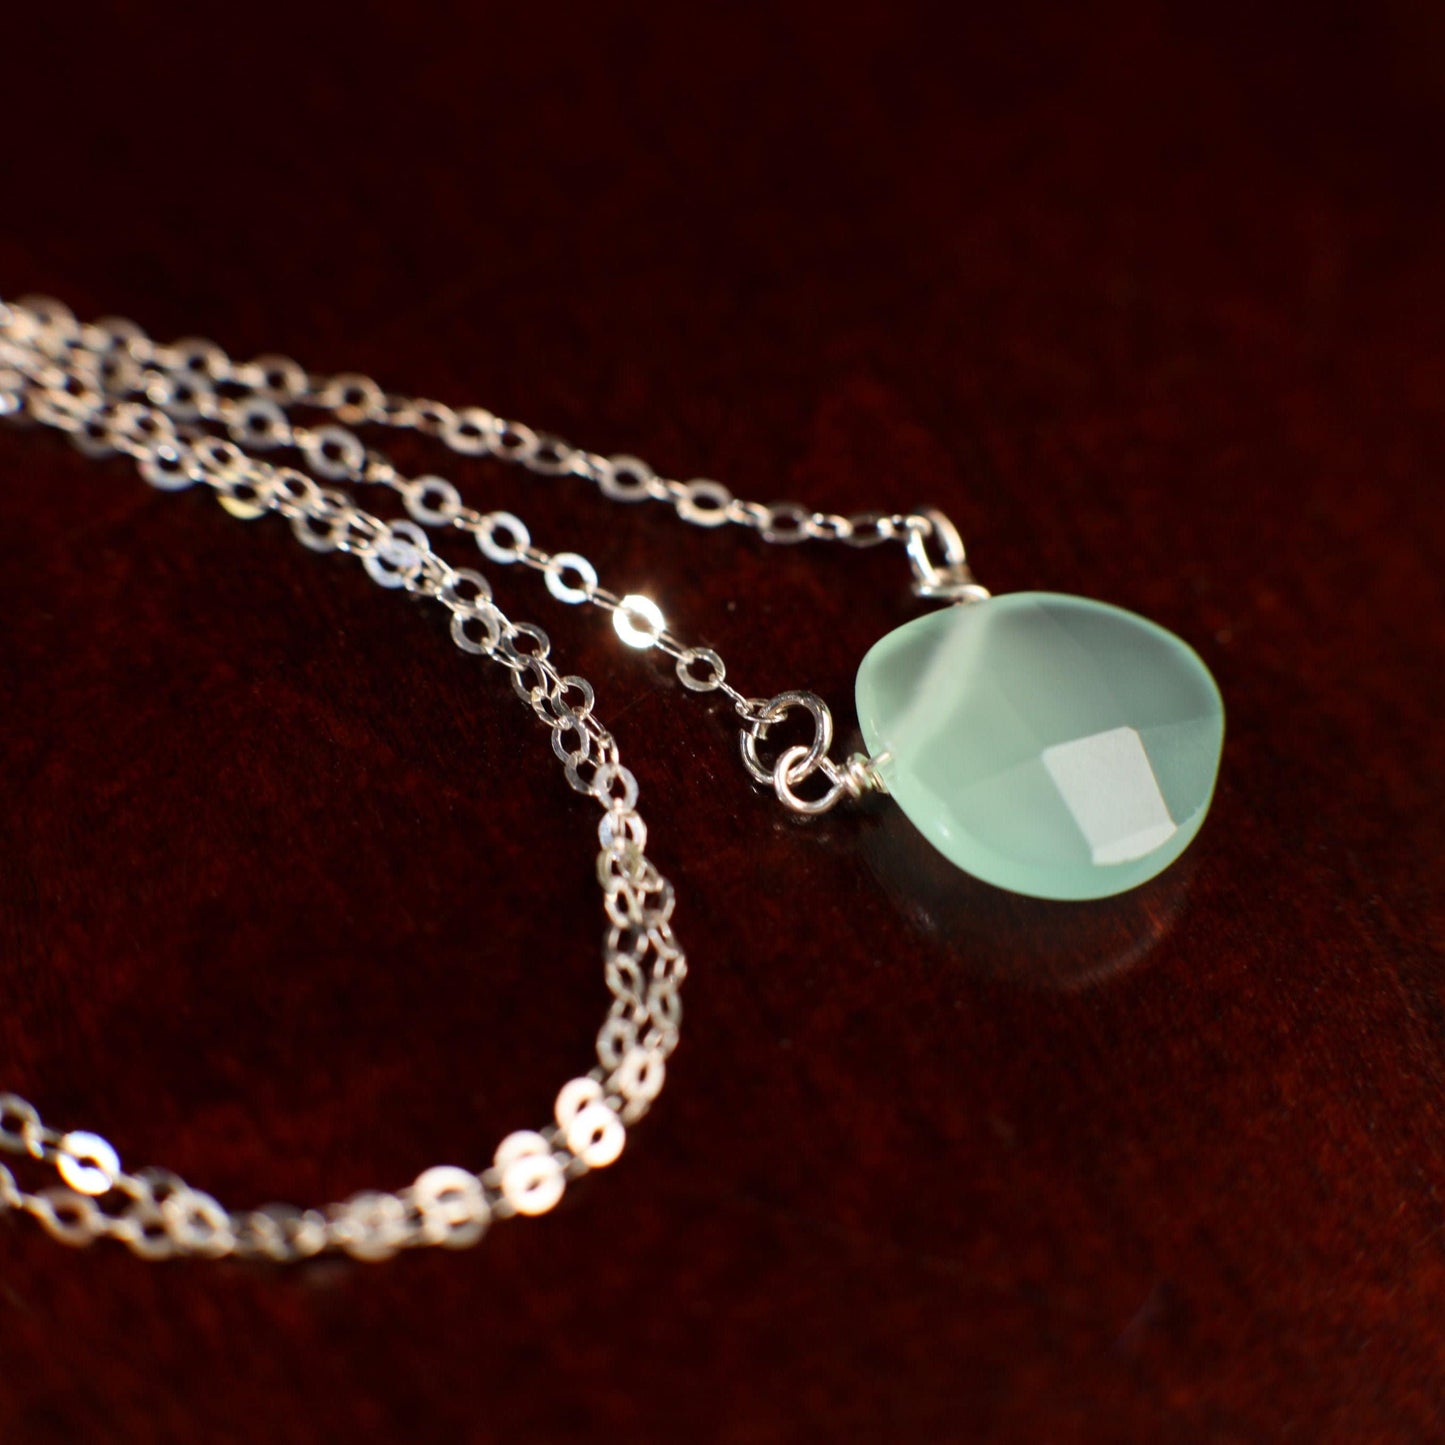 Aqua Chalcedony Faceted Heart Briolette Teardrop AAA Quality 13.5mm Cut Gems in 925 Sterling Silver Necklace valentines gift